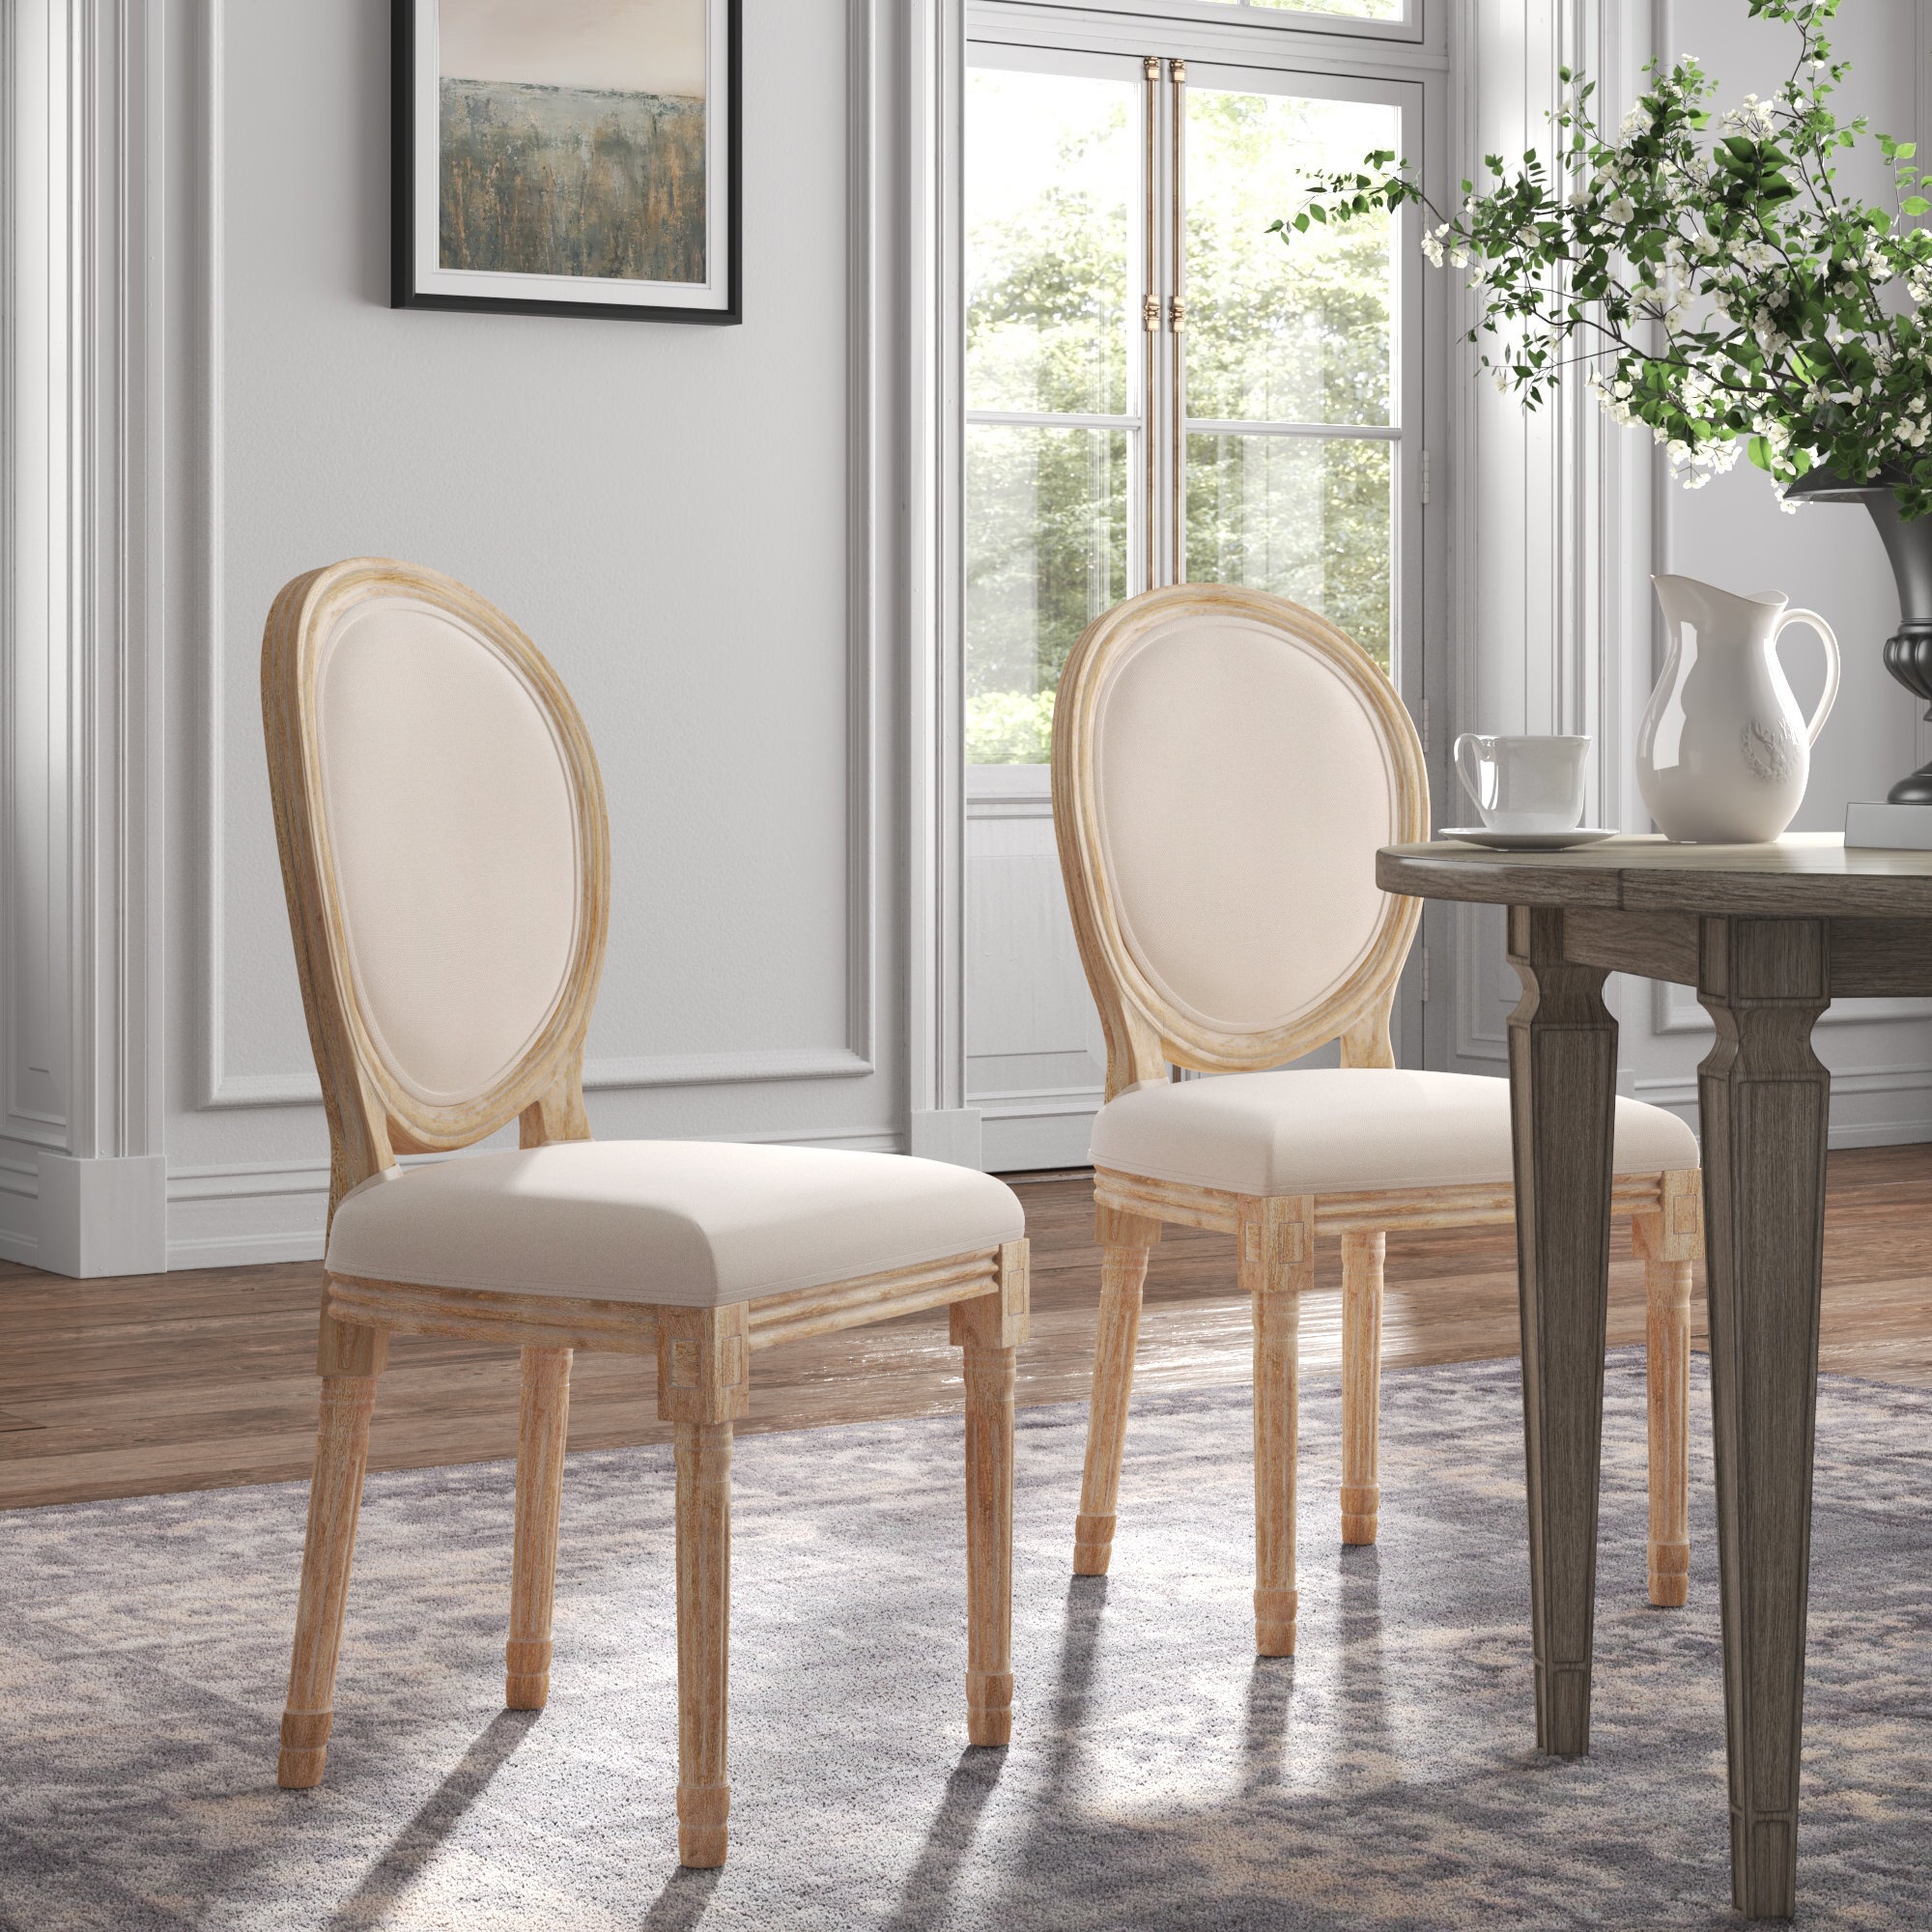 Louis French dining chair in antiqued finish and velvet